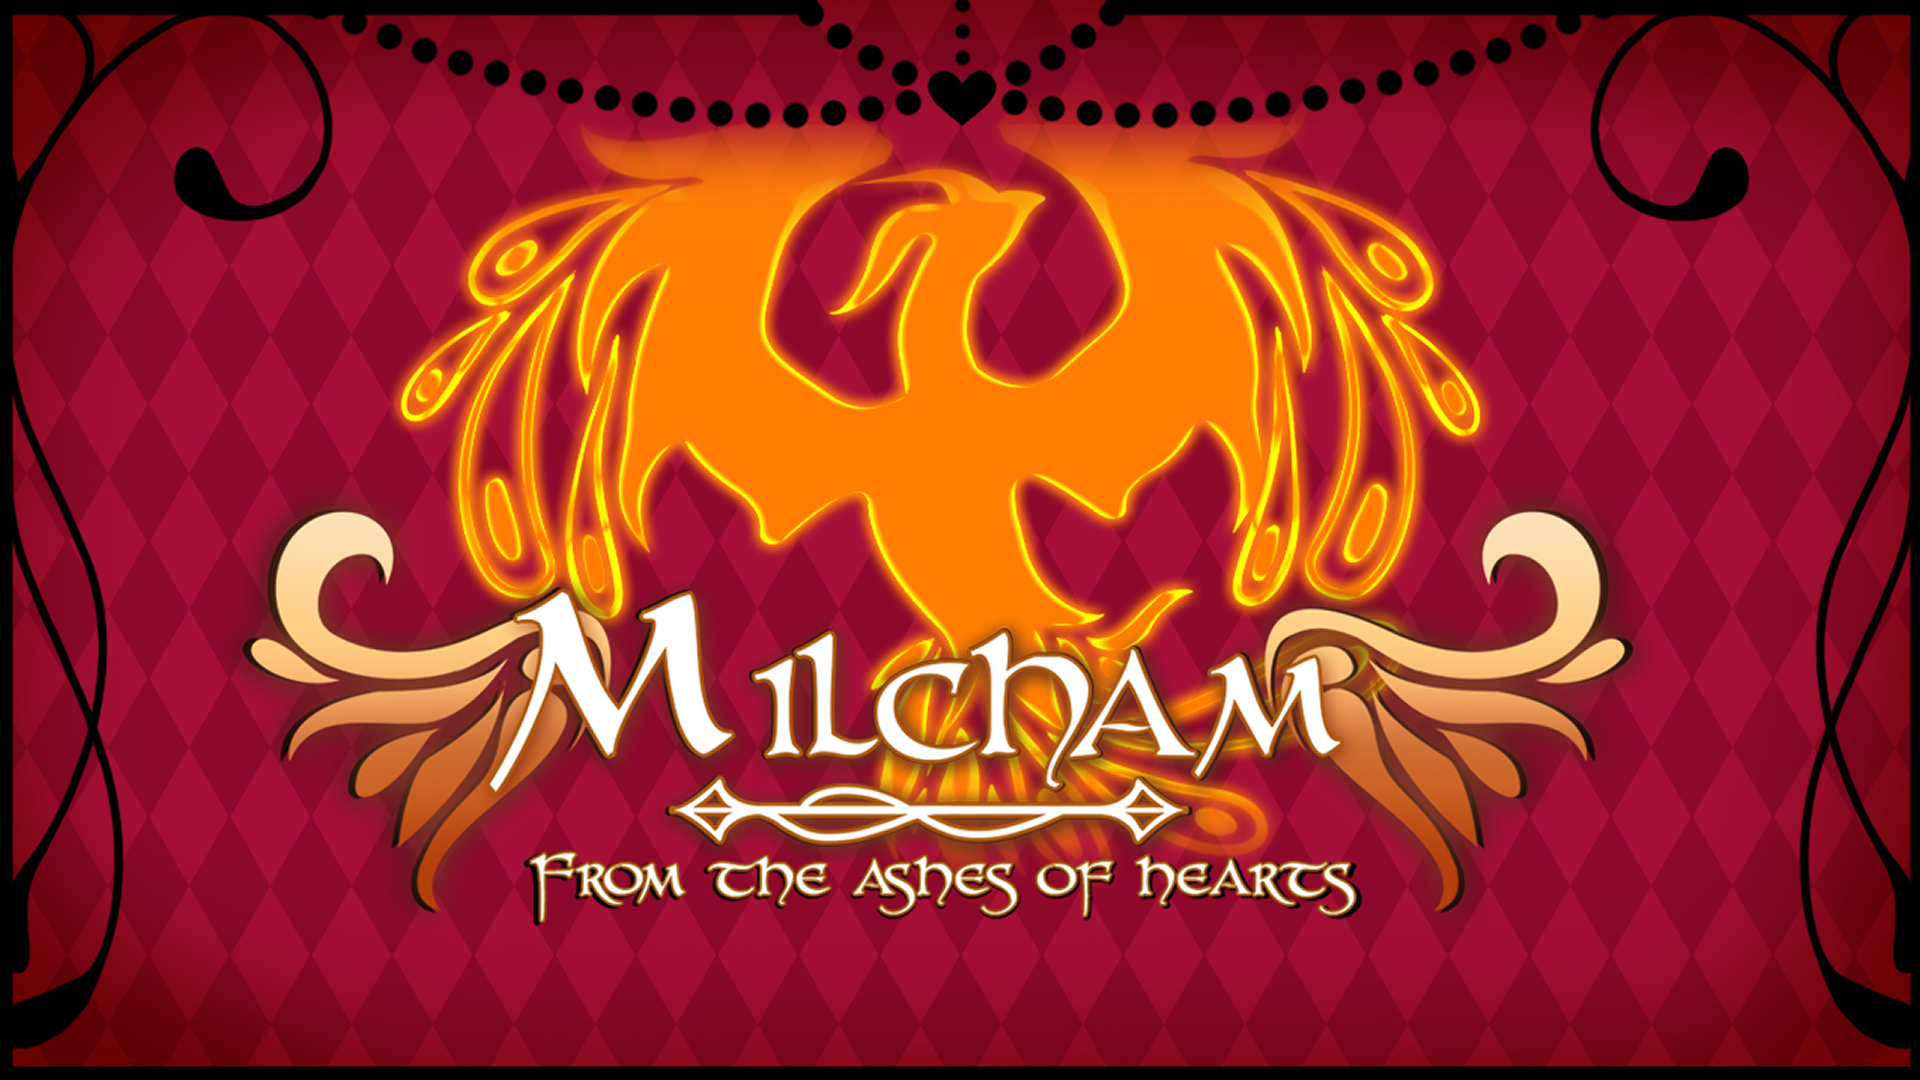 Milcham: From the Ashes of Hearts